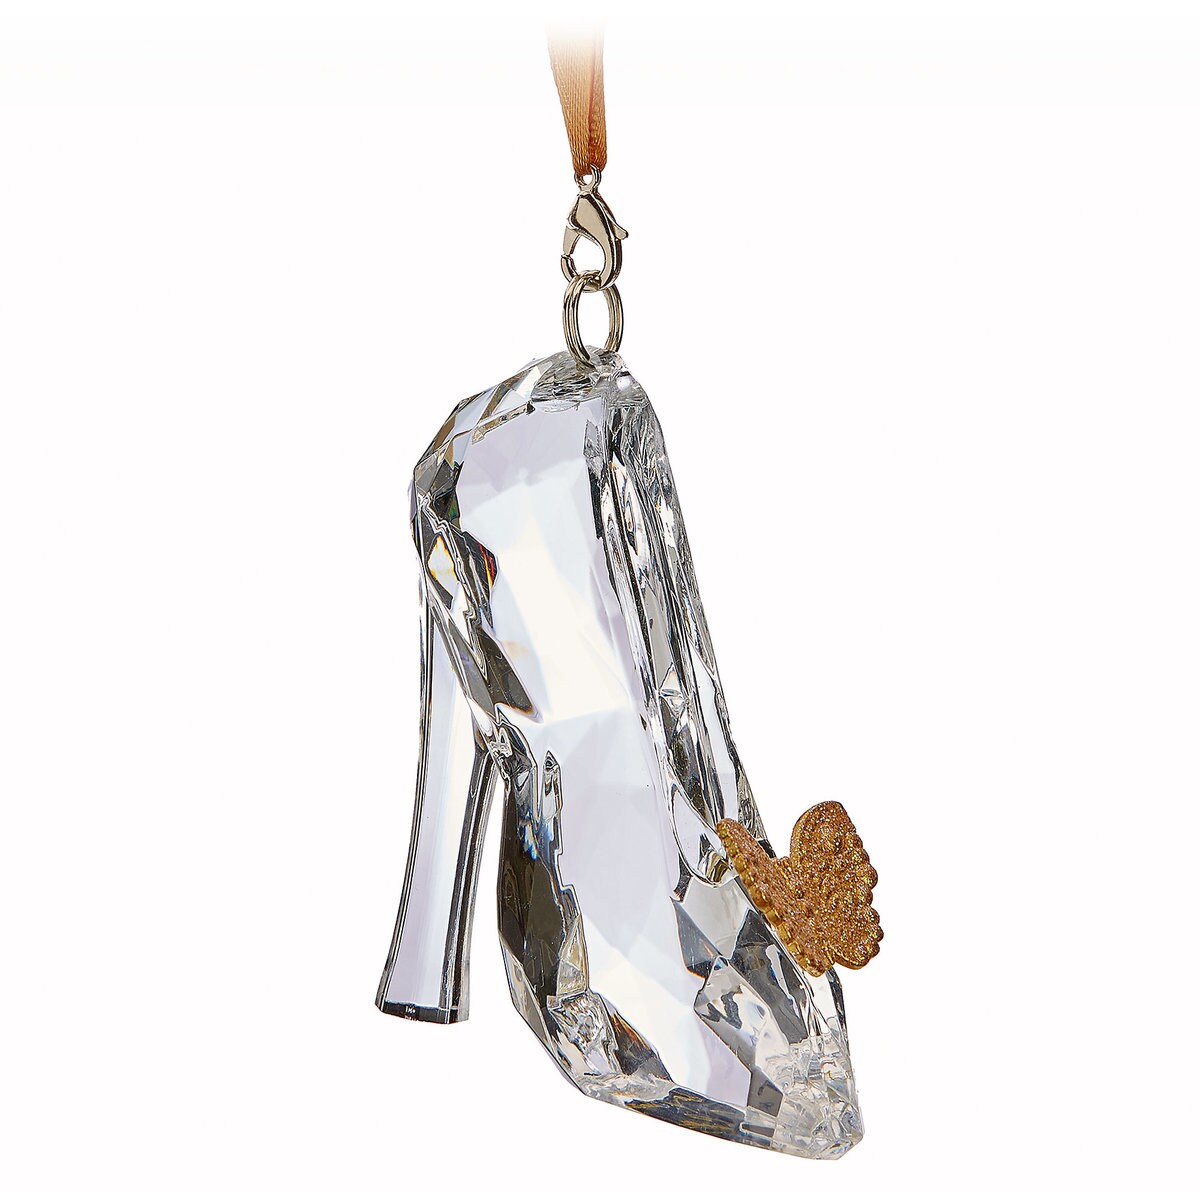 Product Image of Cinderella Slipper Ornament - Live Action Film # 1